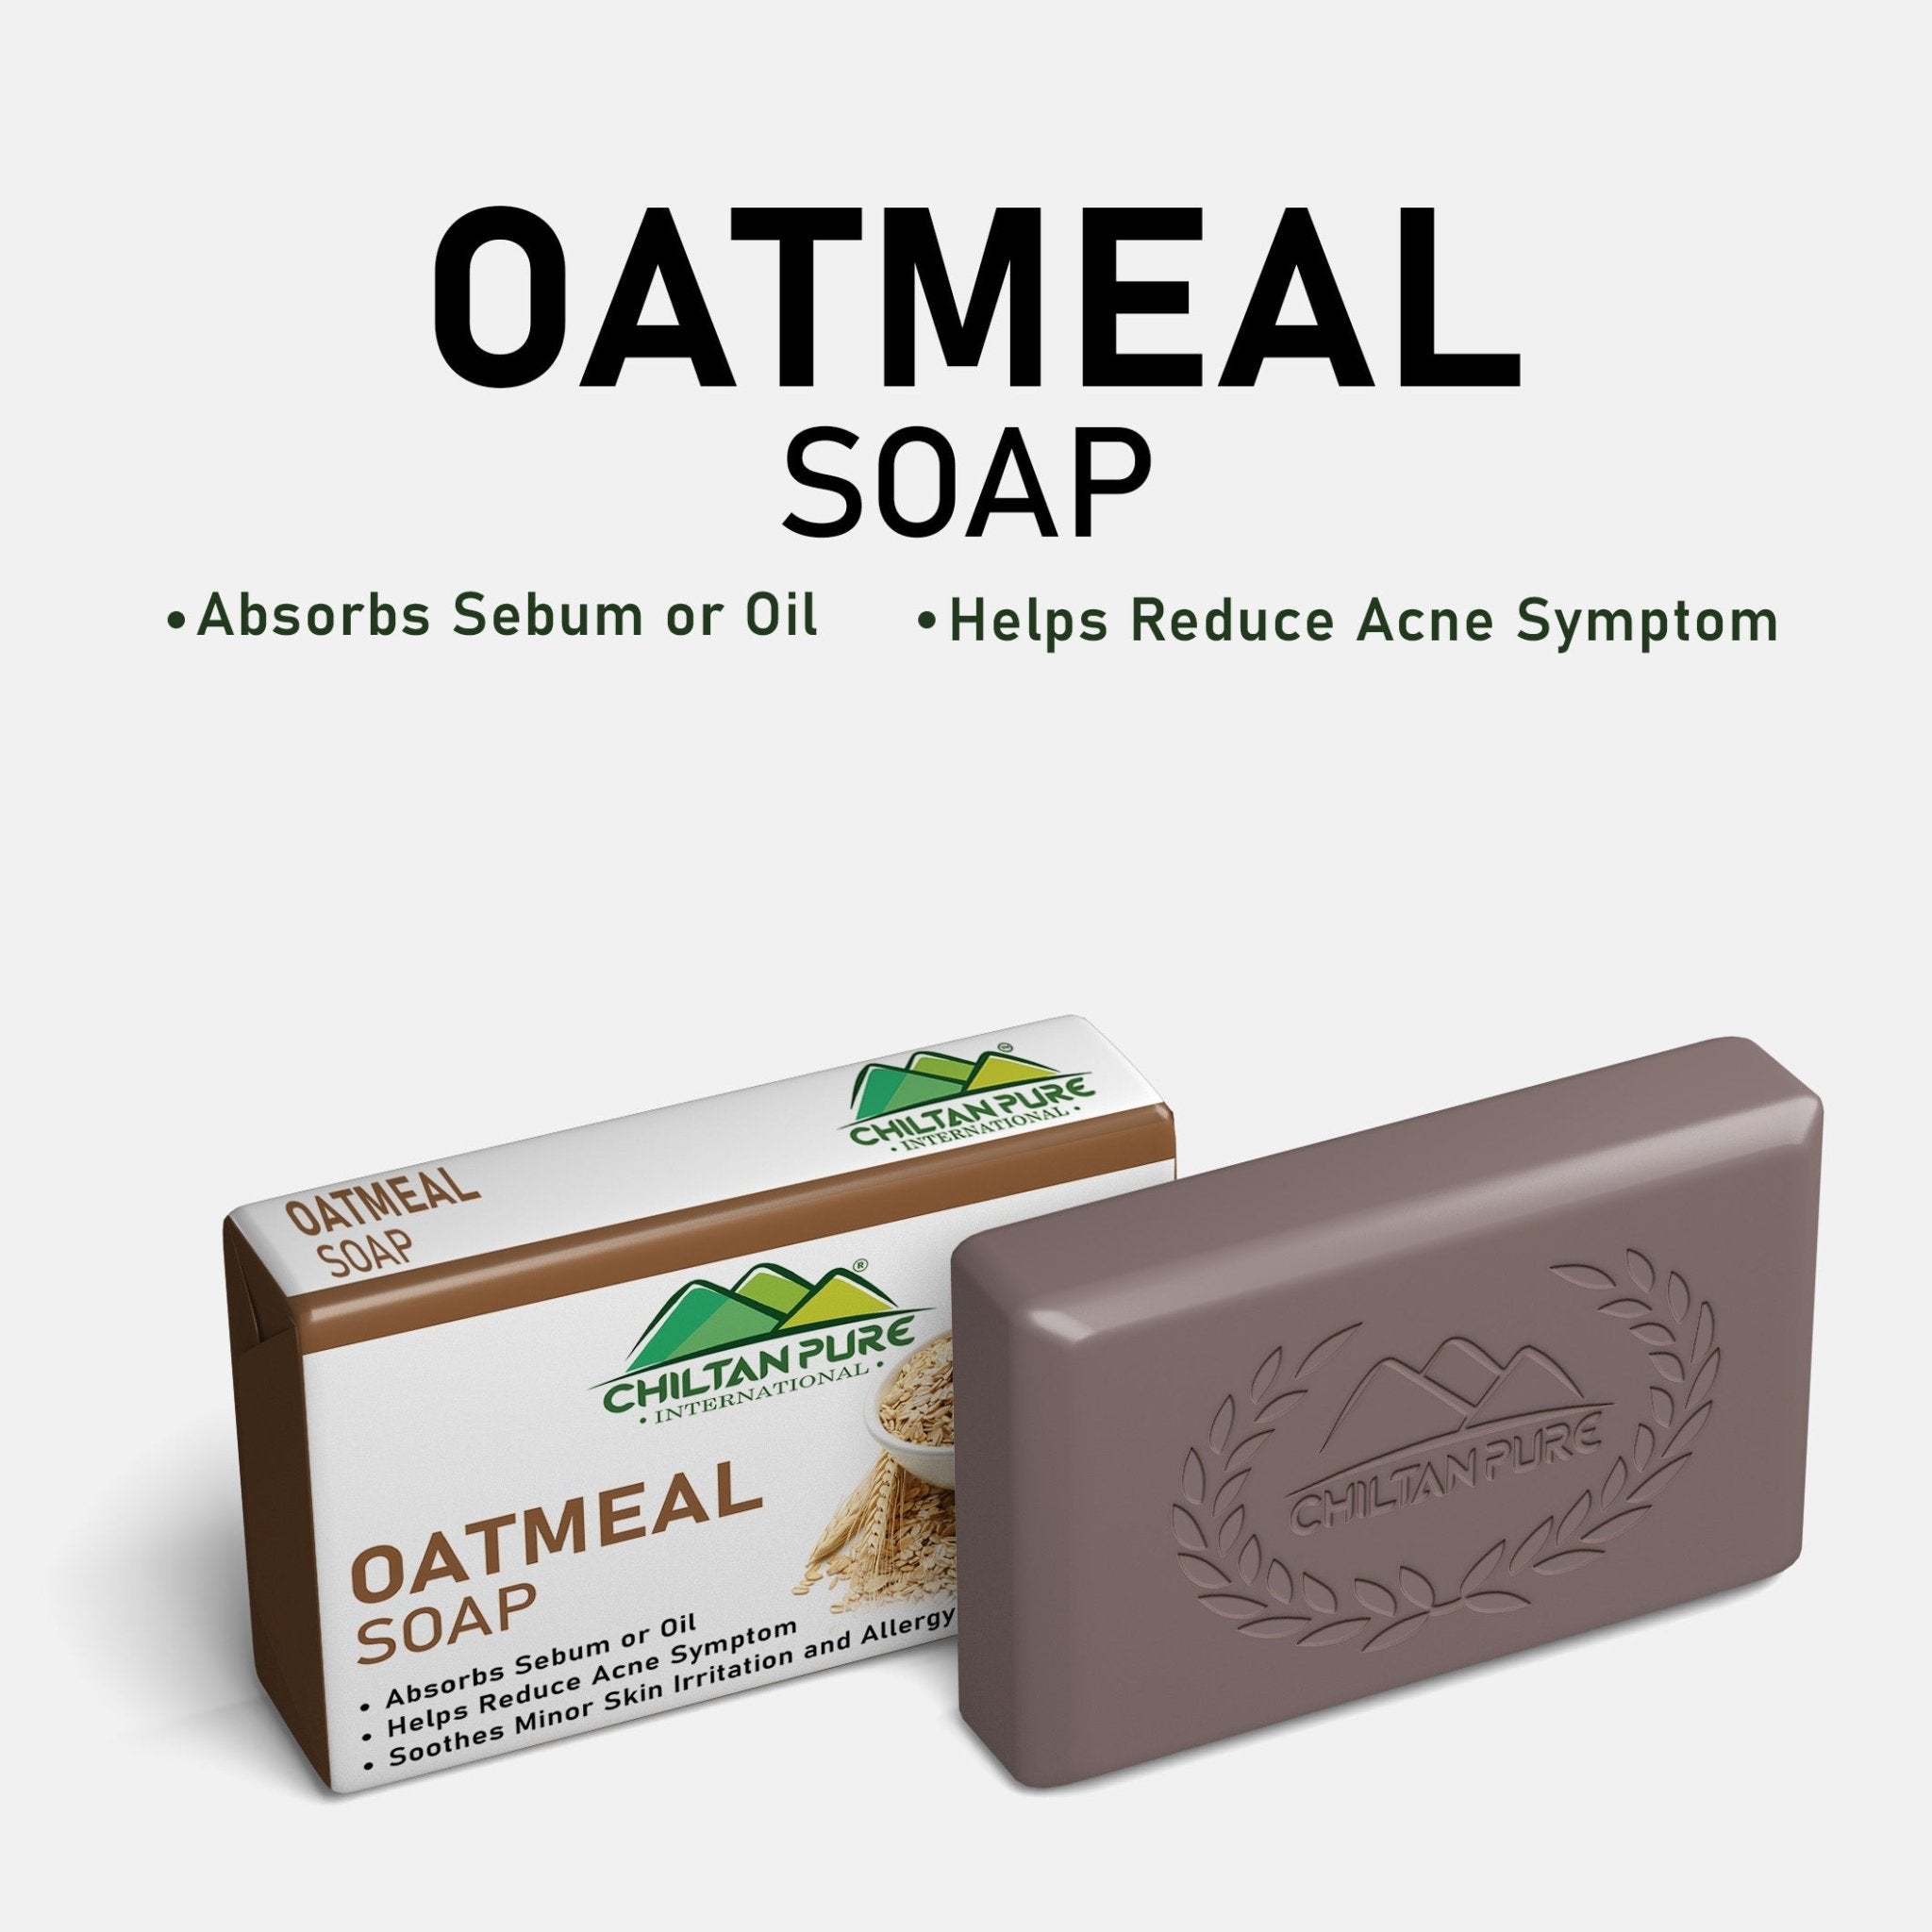 OATMEAL Soap – Absorbs Sebums or Oil & Help Reduce Acne Symptom - ChiltanPure